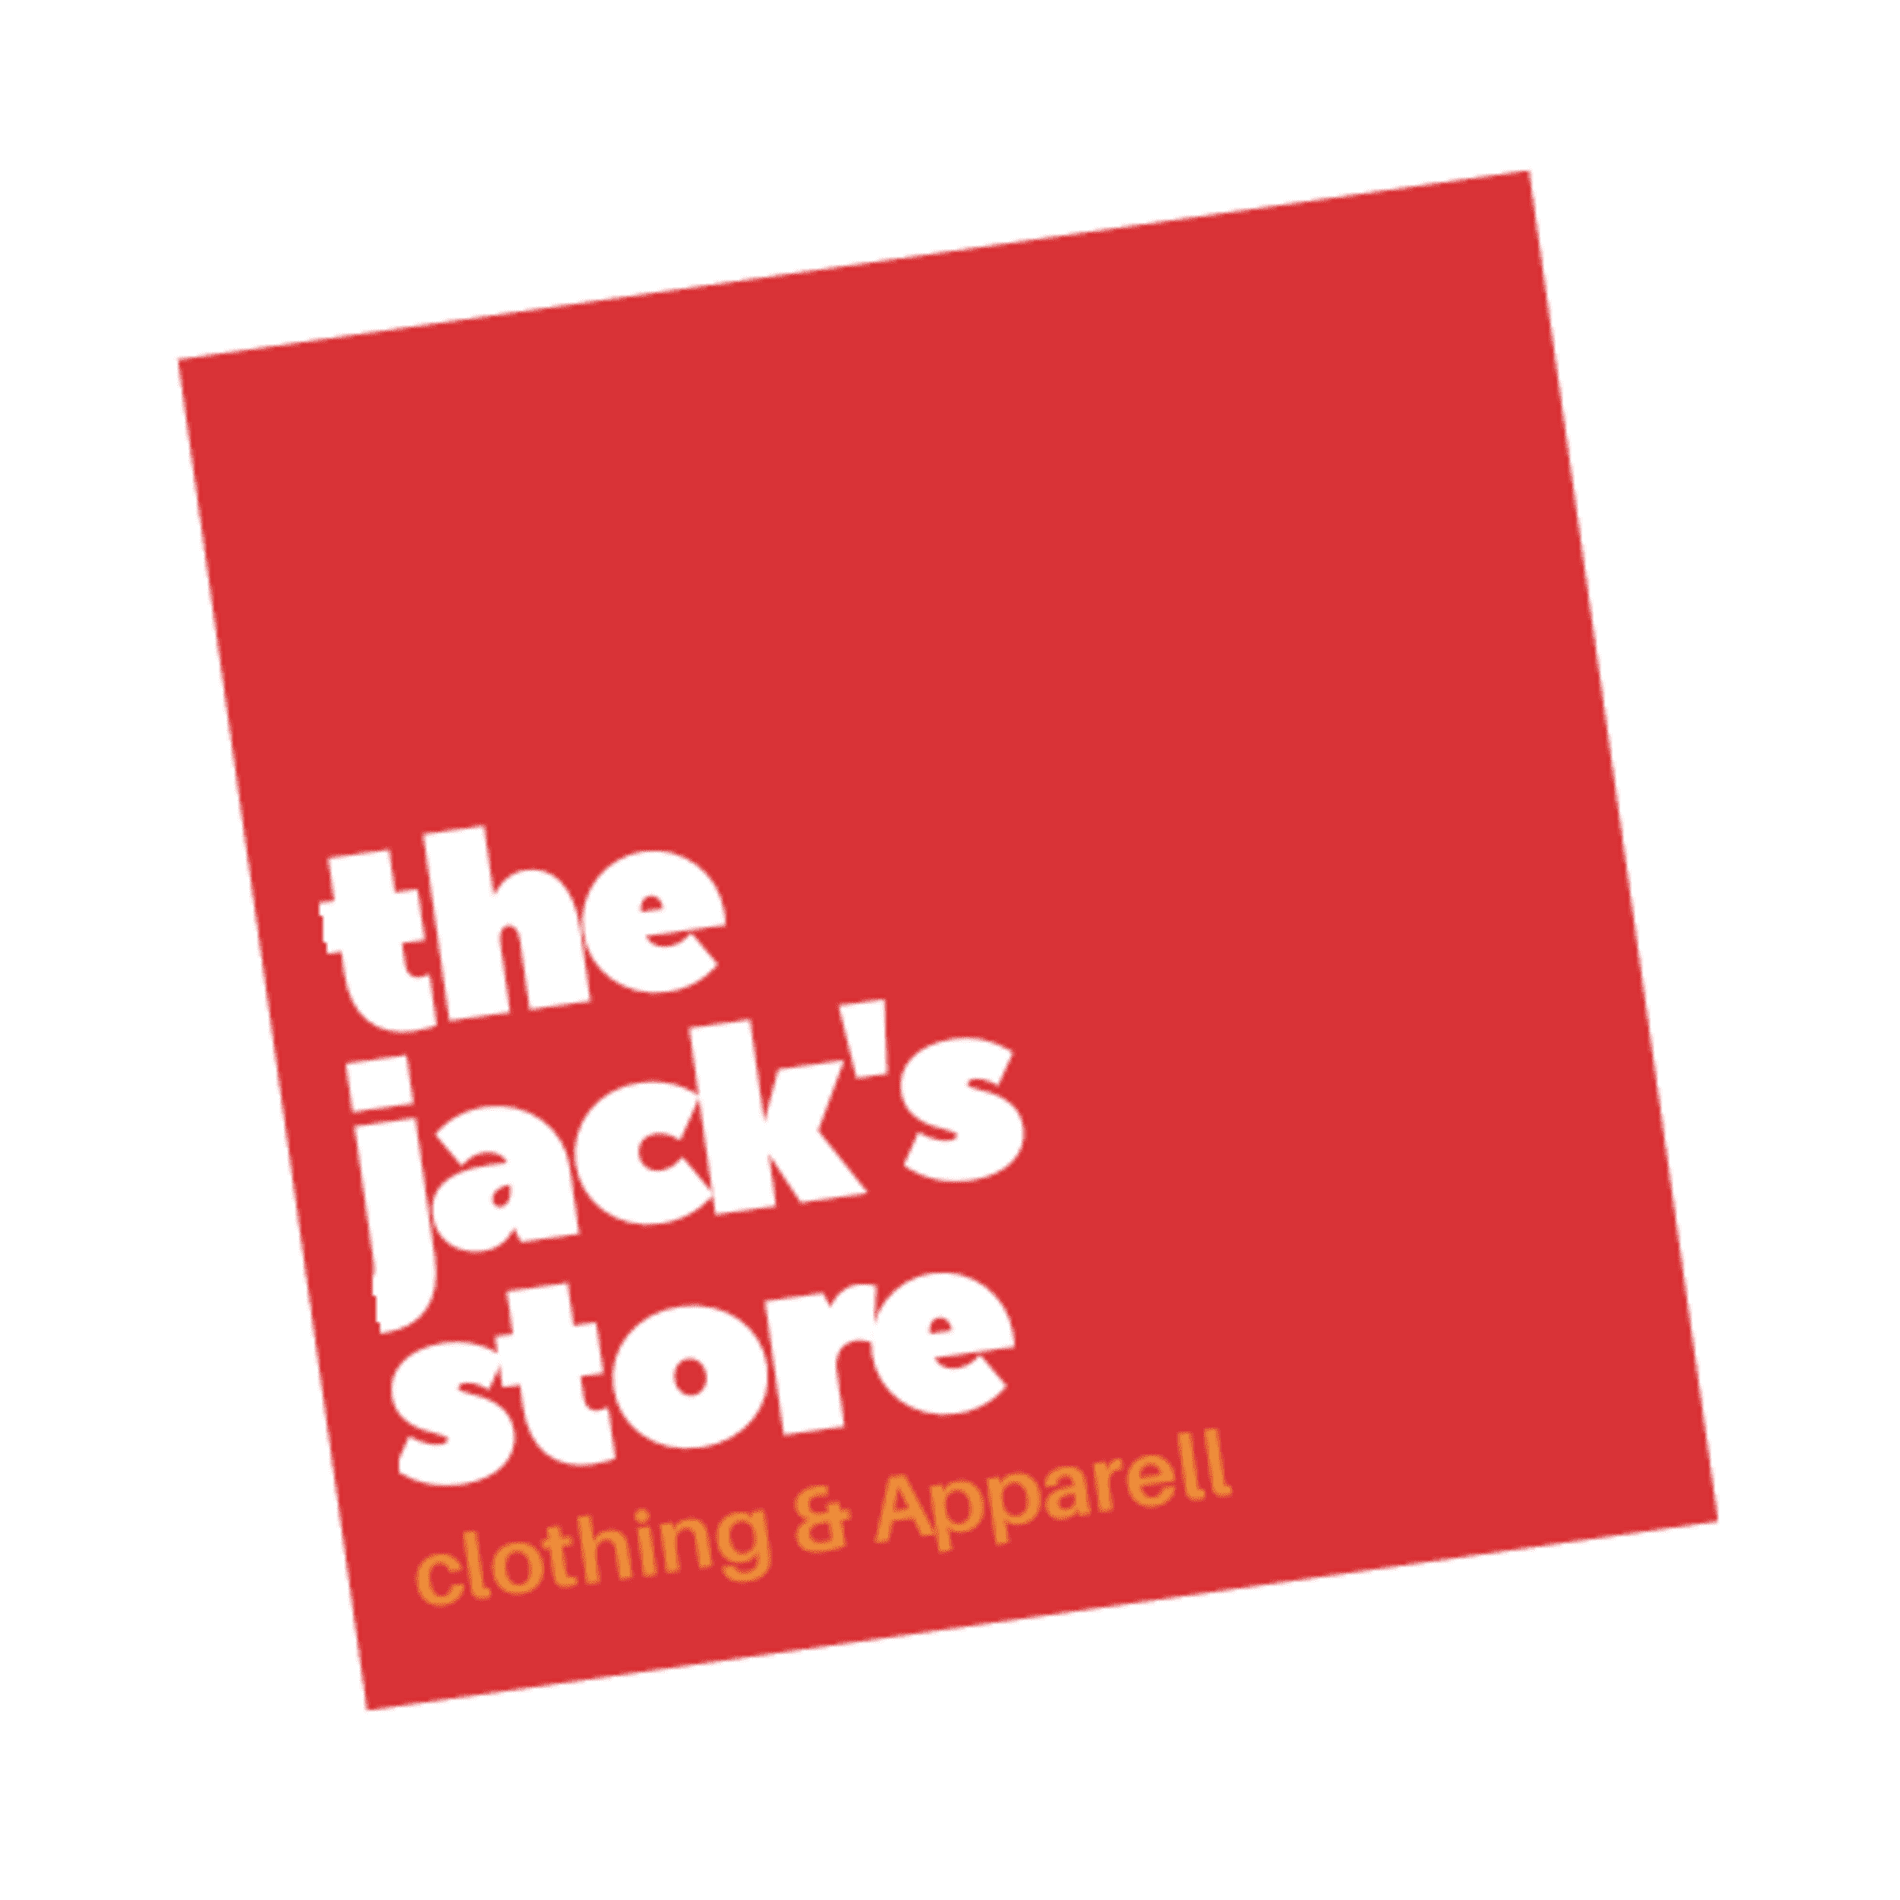 The Jack's Store